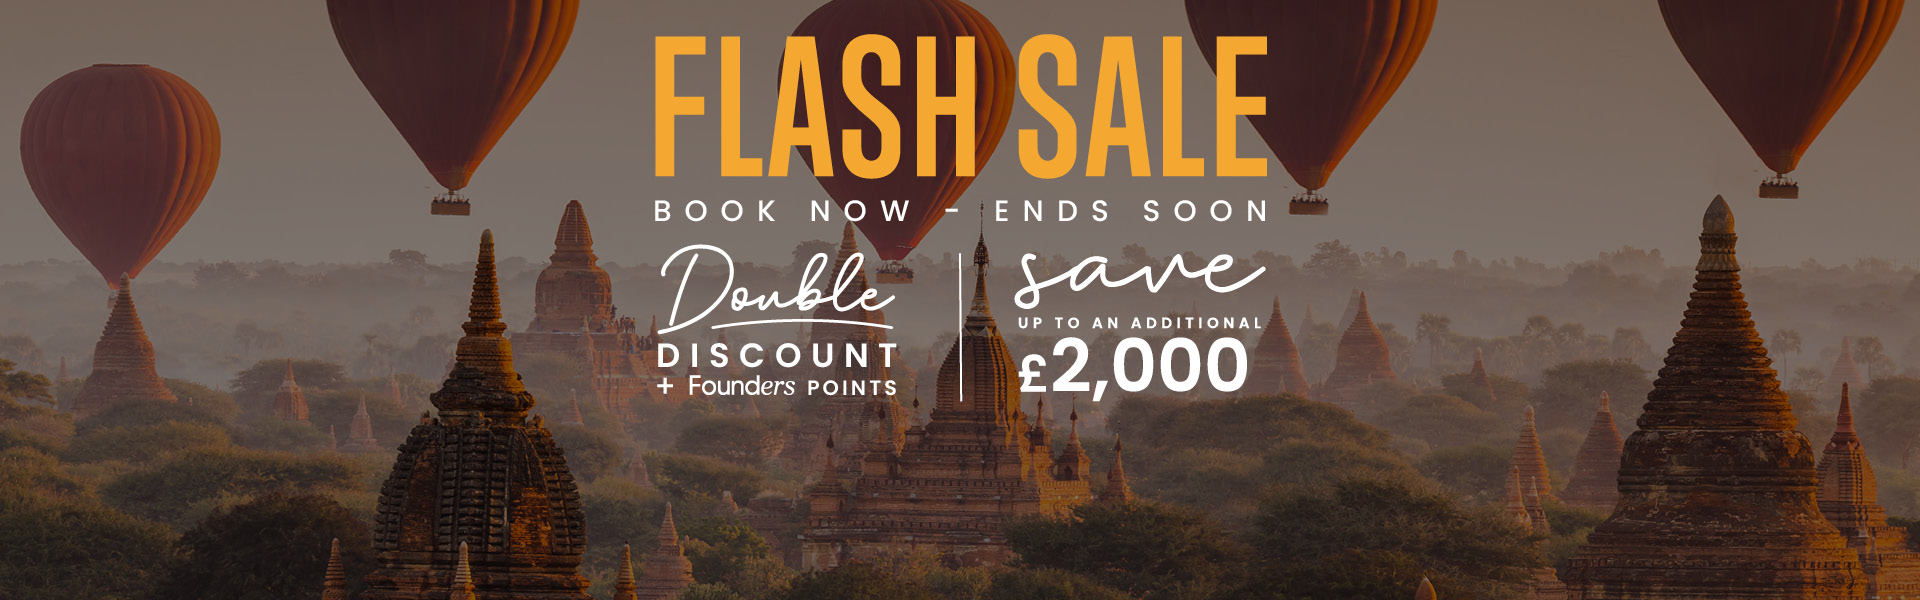 Panache Cruises Double Discounts - Save up to an Additional £2,000